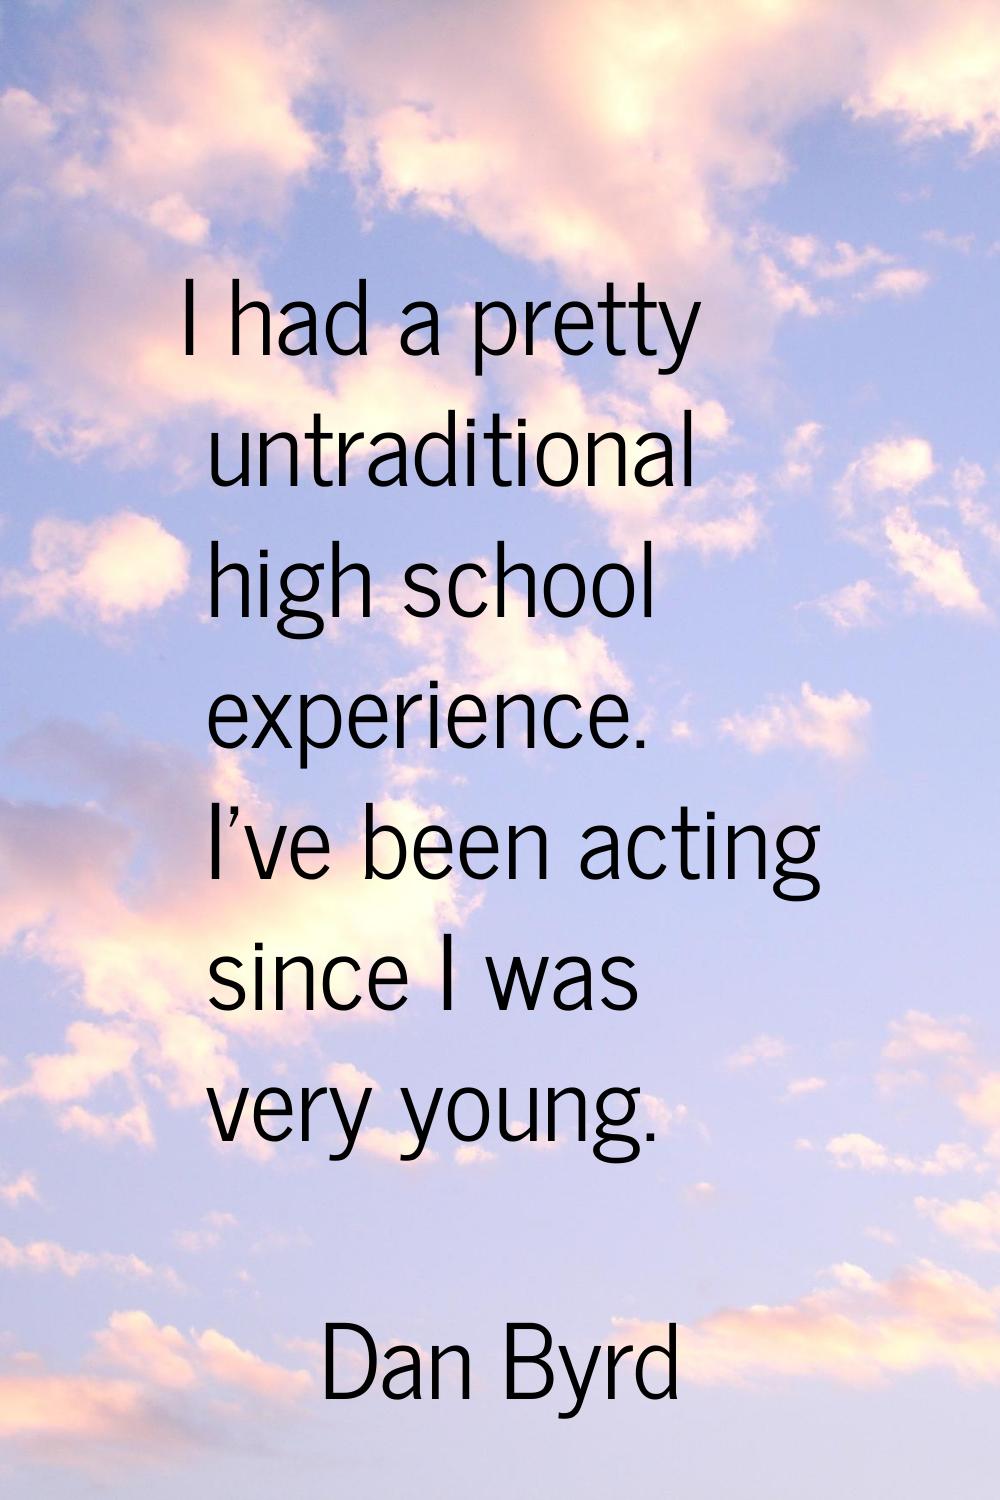 I had a pretty untraditional high school experience. I've been acting since I was very young.